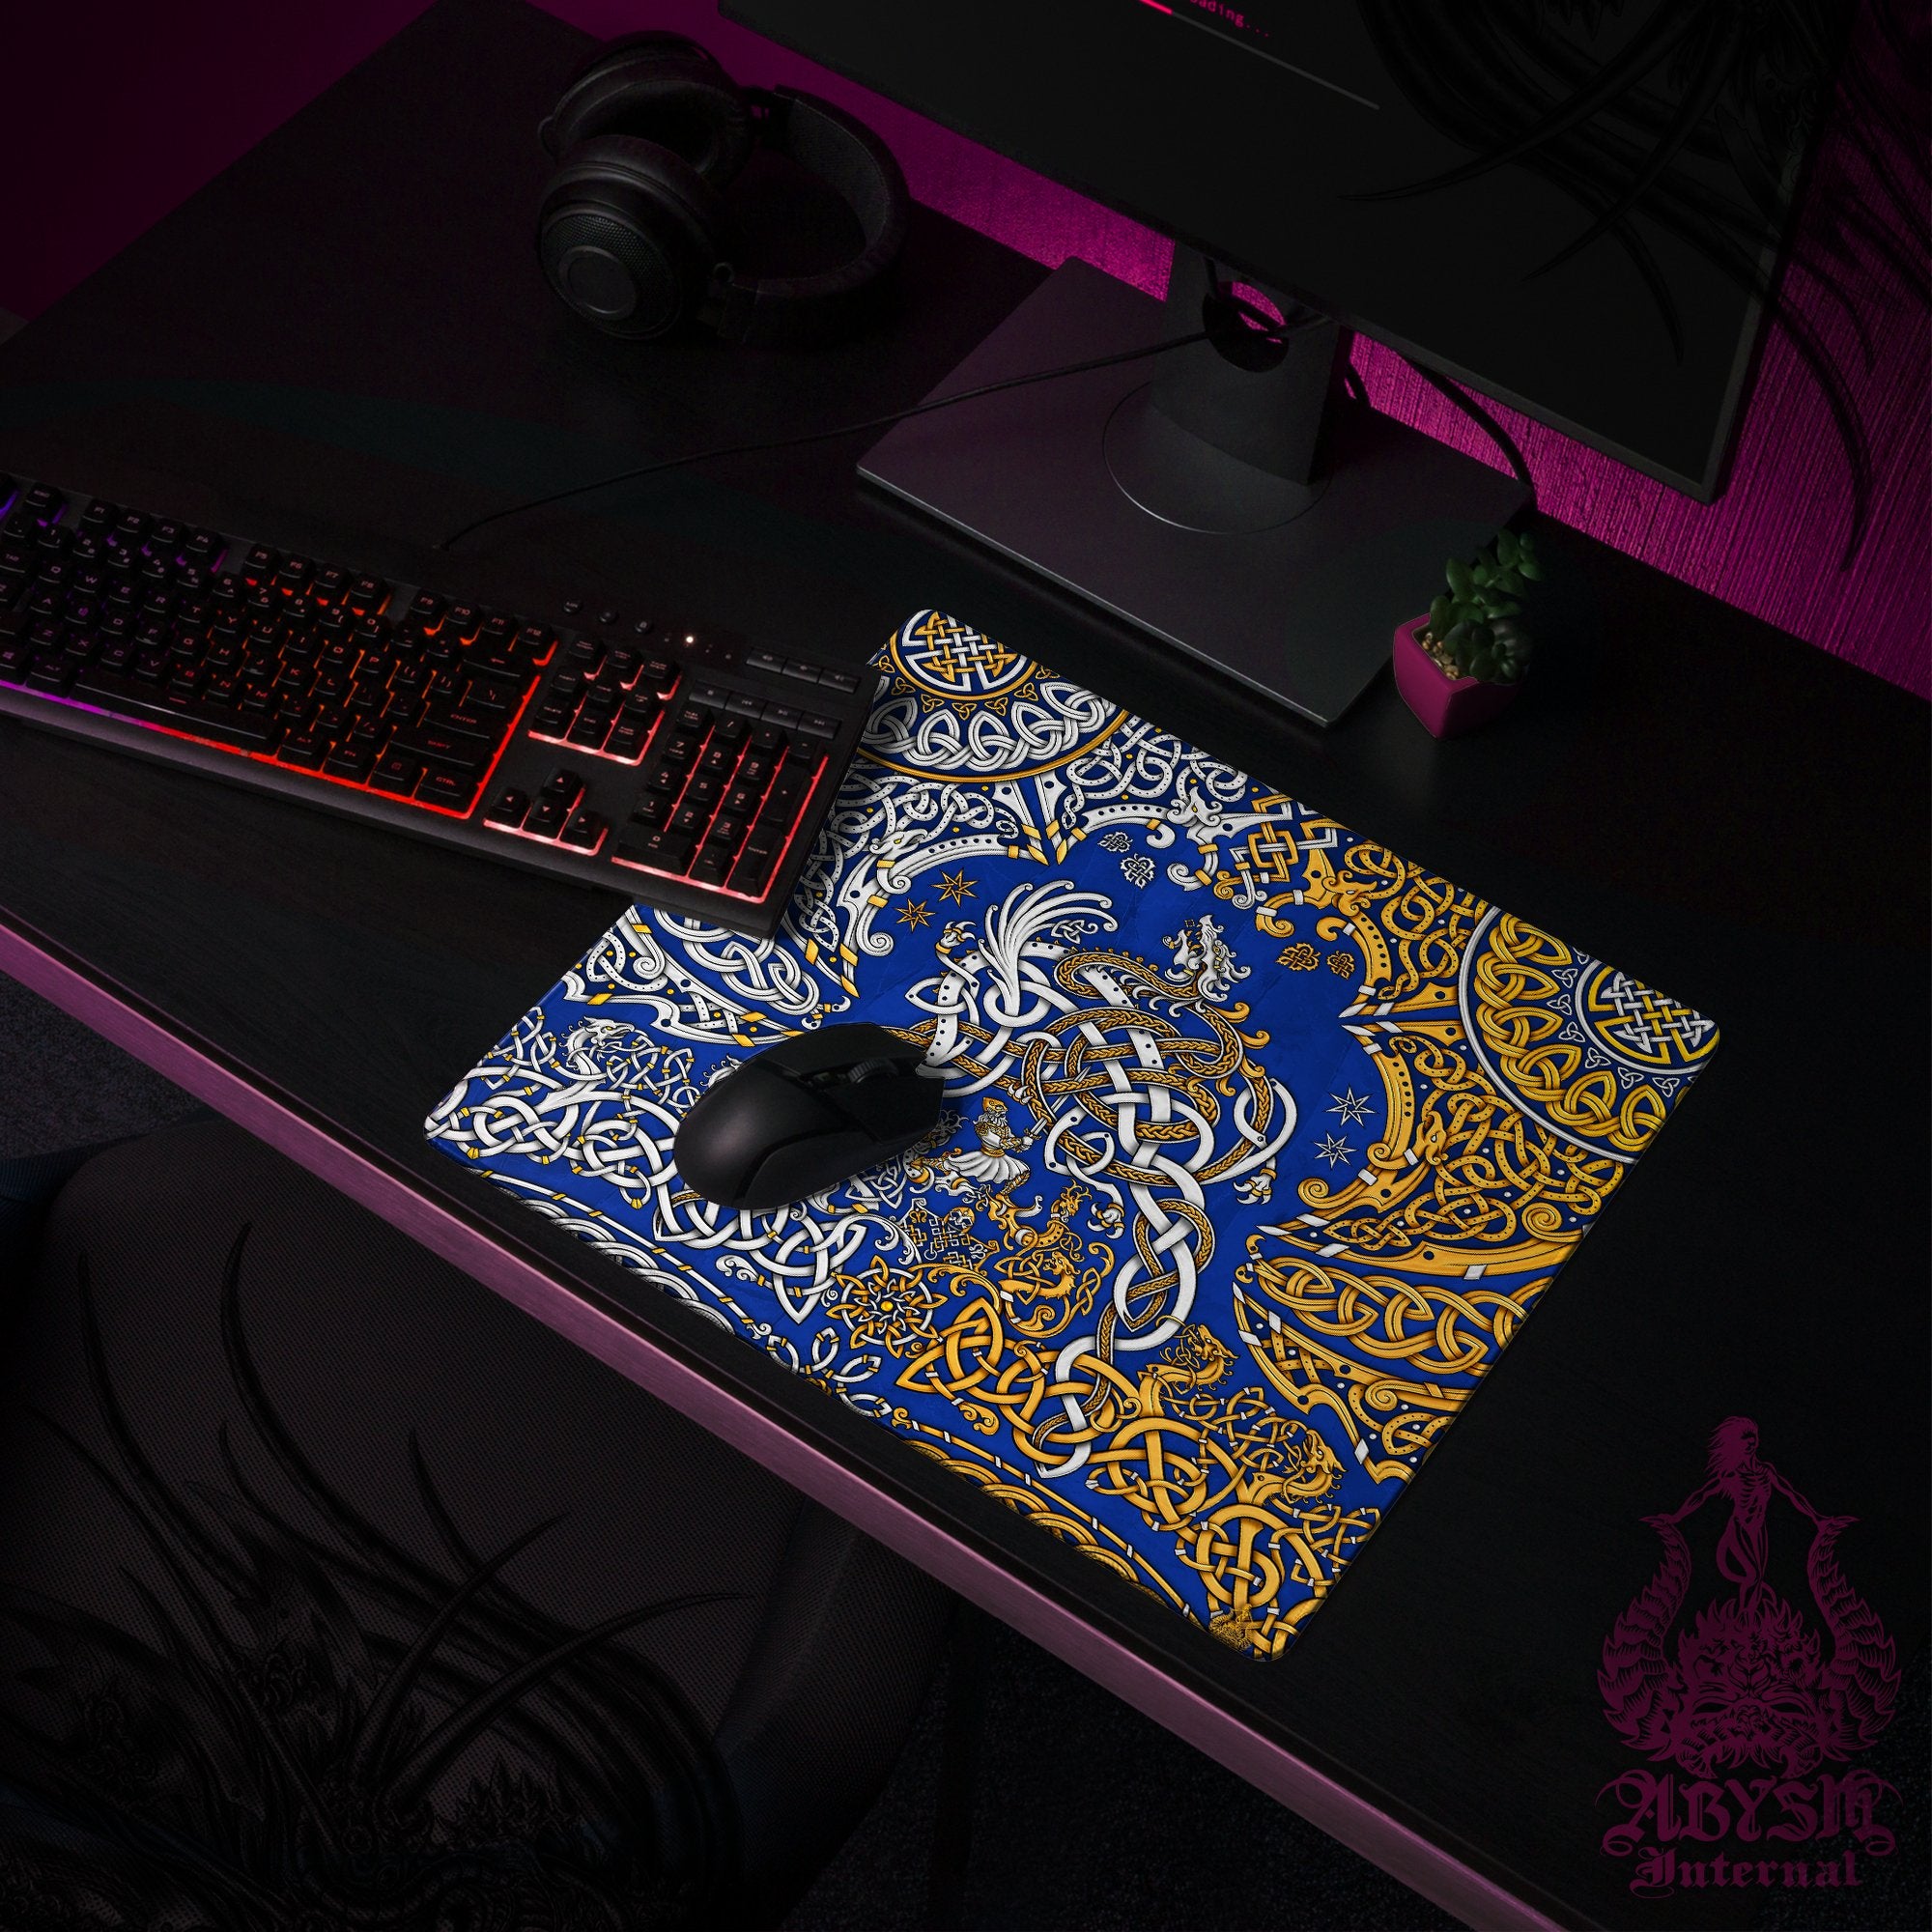 Viking Desk Mat, Norse Dragon Gaming Mouse Pad, Nordic Knotwork Table Protector Cover, Fafnir Workpad, Art Print - Gold, 3 Colors - Abysm Internal